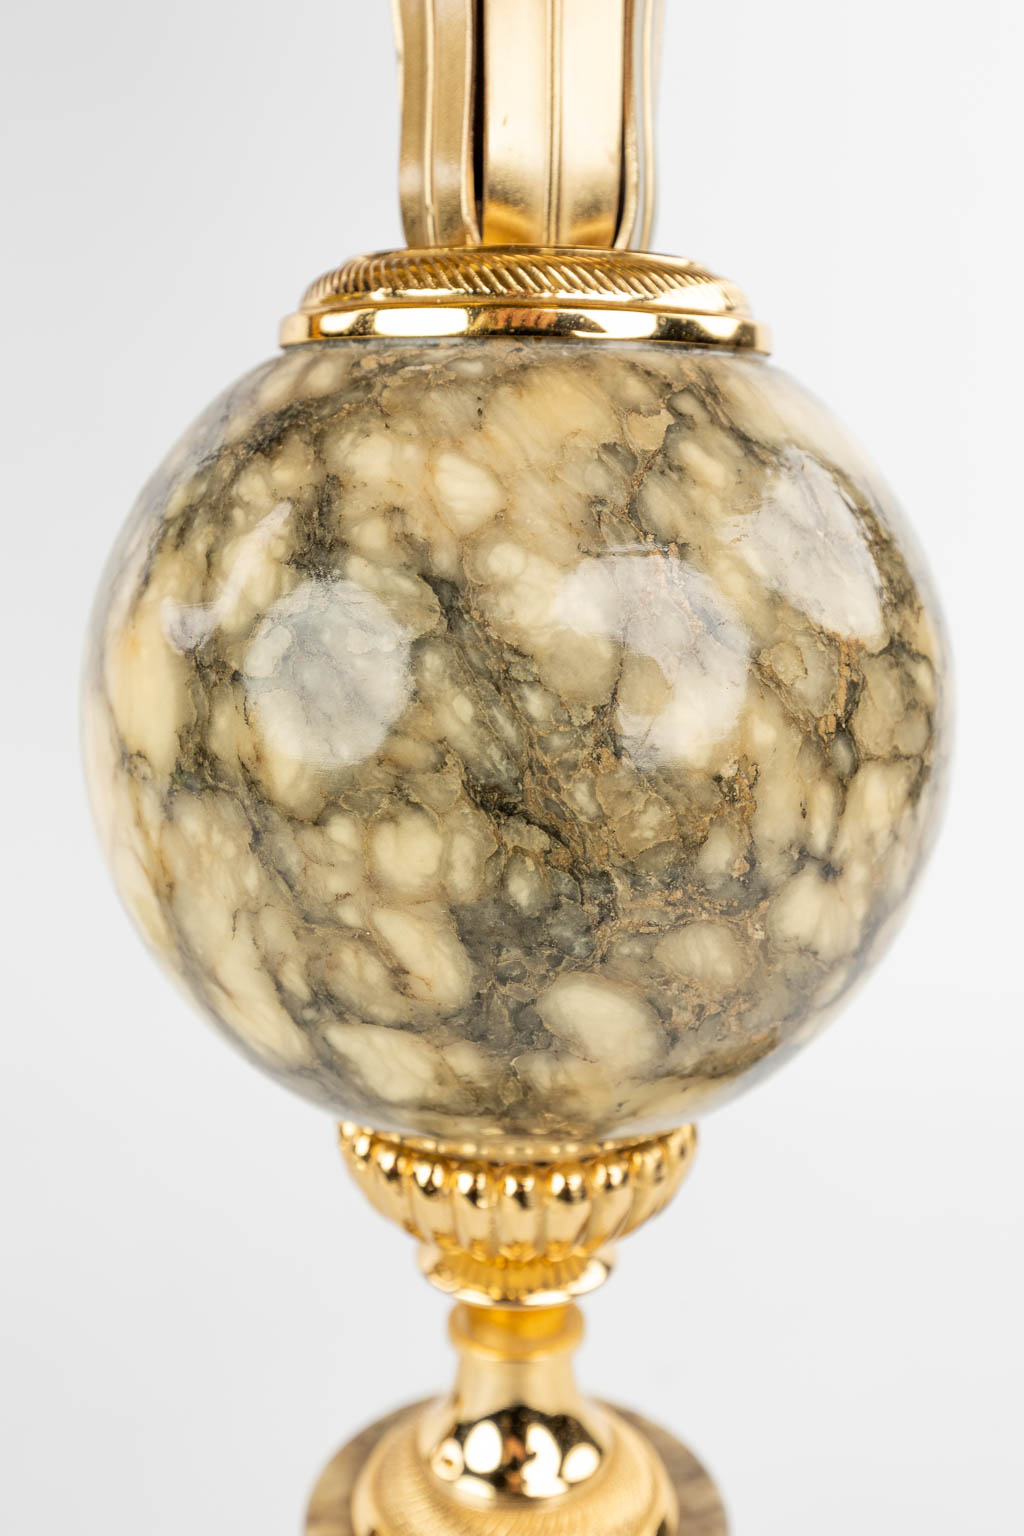 A pair of table lamps in Hollywood Regency style, with balls made of marble. (H:73cm)